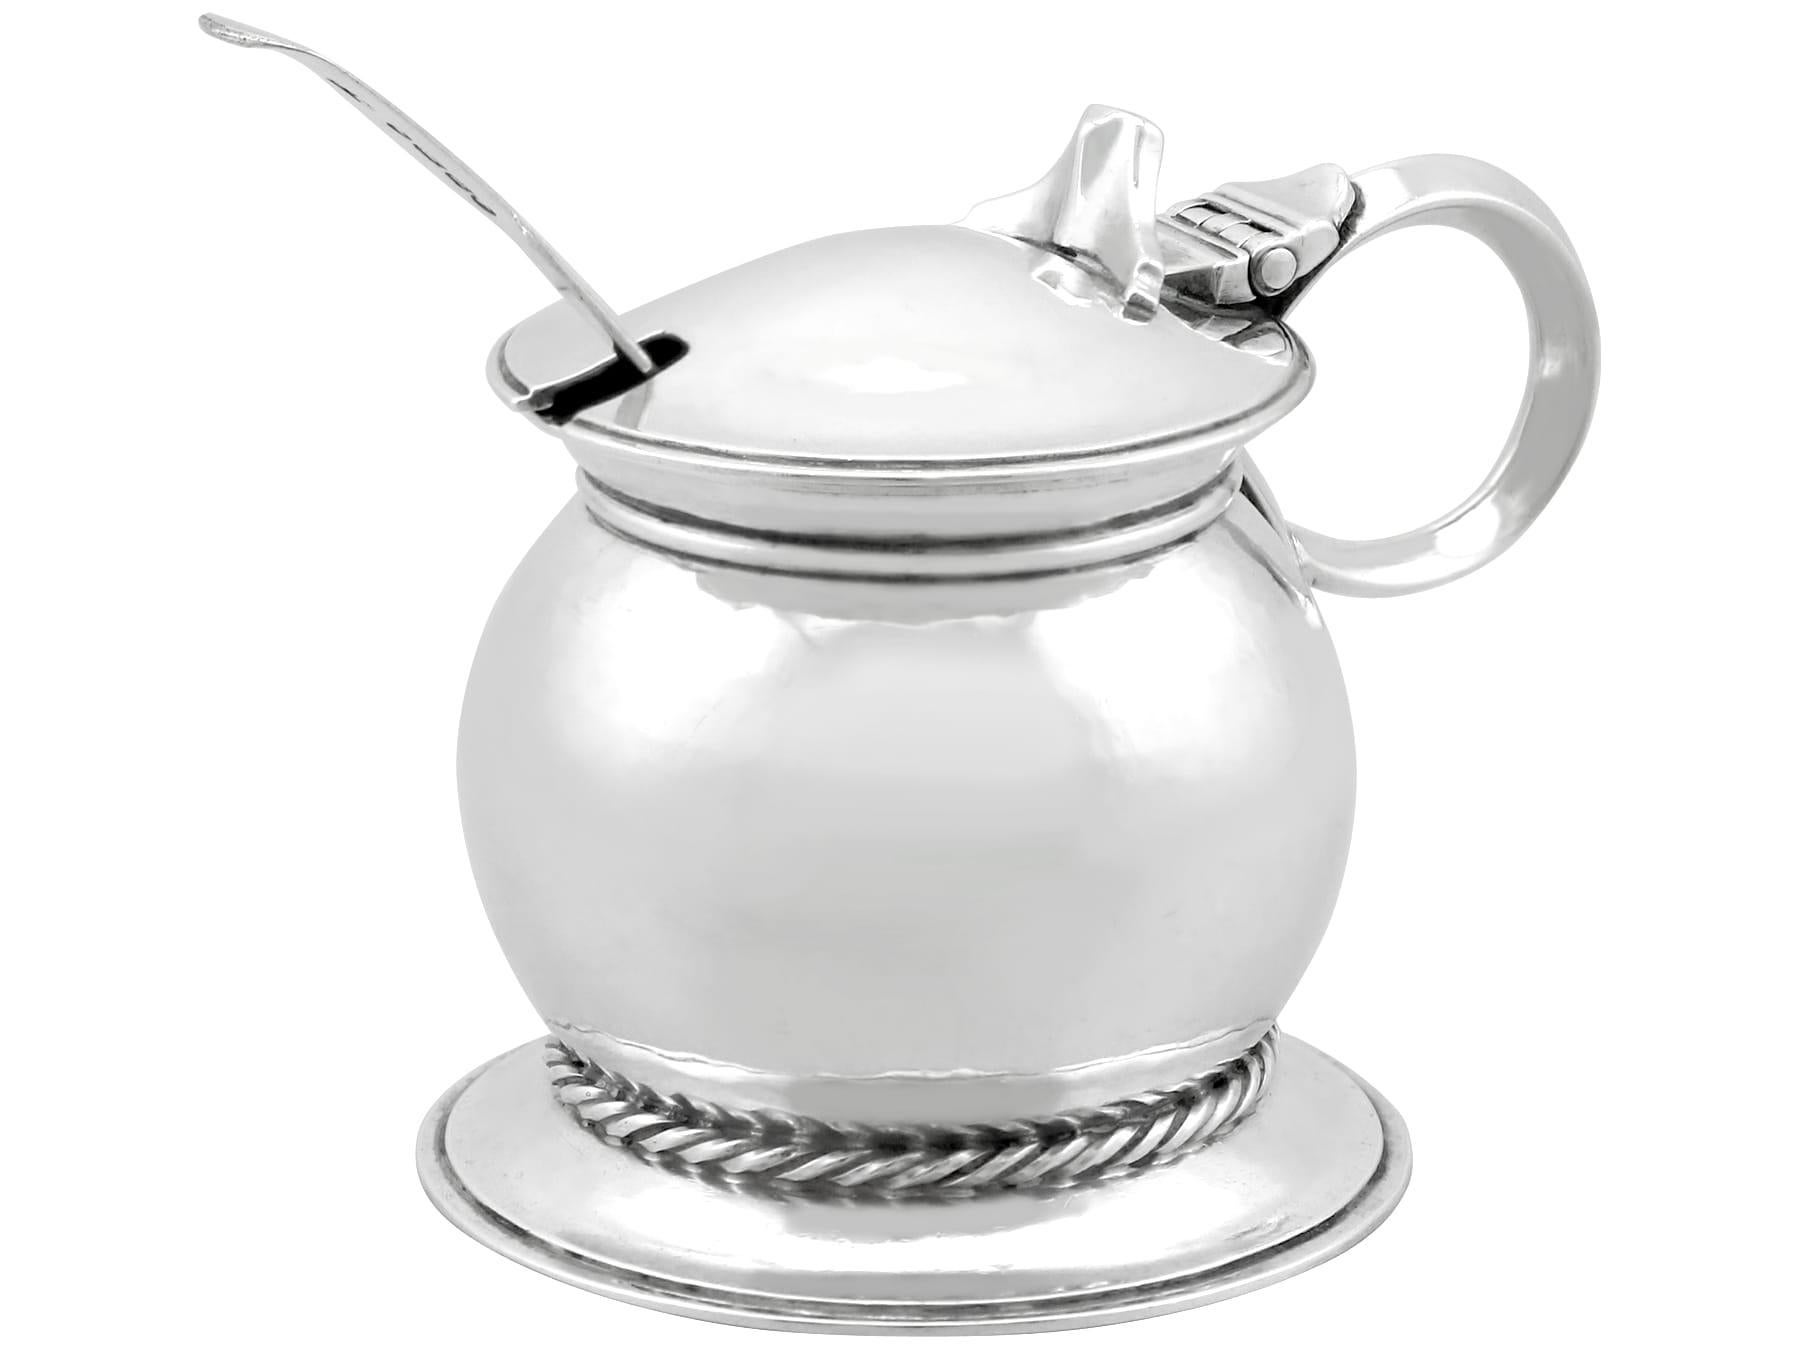 An exceptional, fine and impressive, unusual antique George V English sterling silver mustard pot made by Omar Ramsden in the Arts and Crafts style; an addition to our collectable silverware collection.

This exceptional antique George V sterling